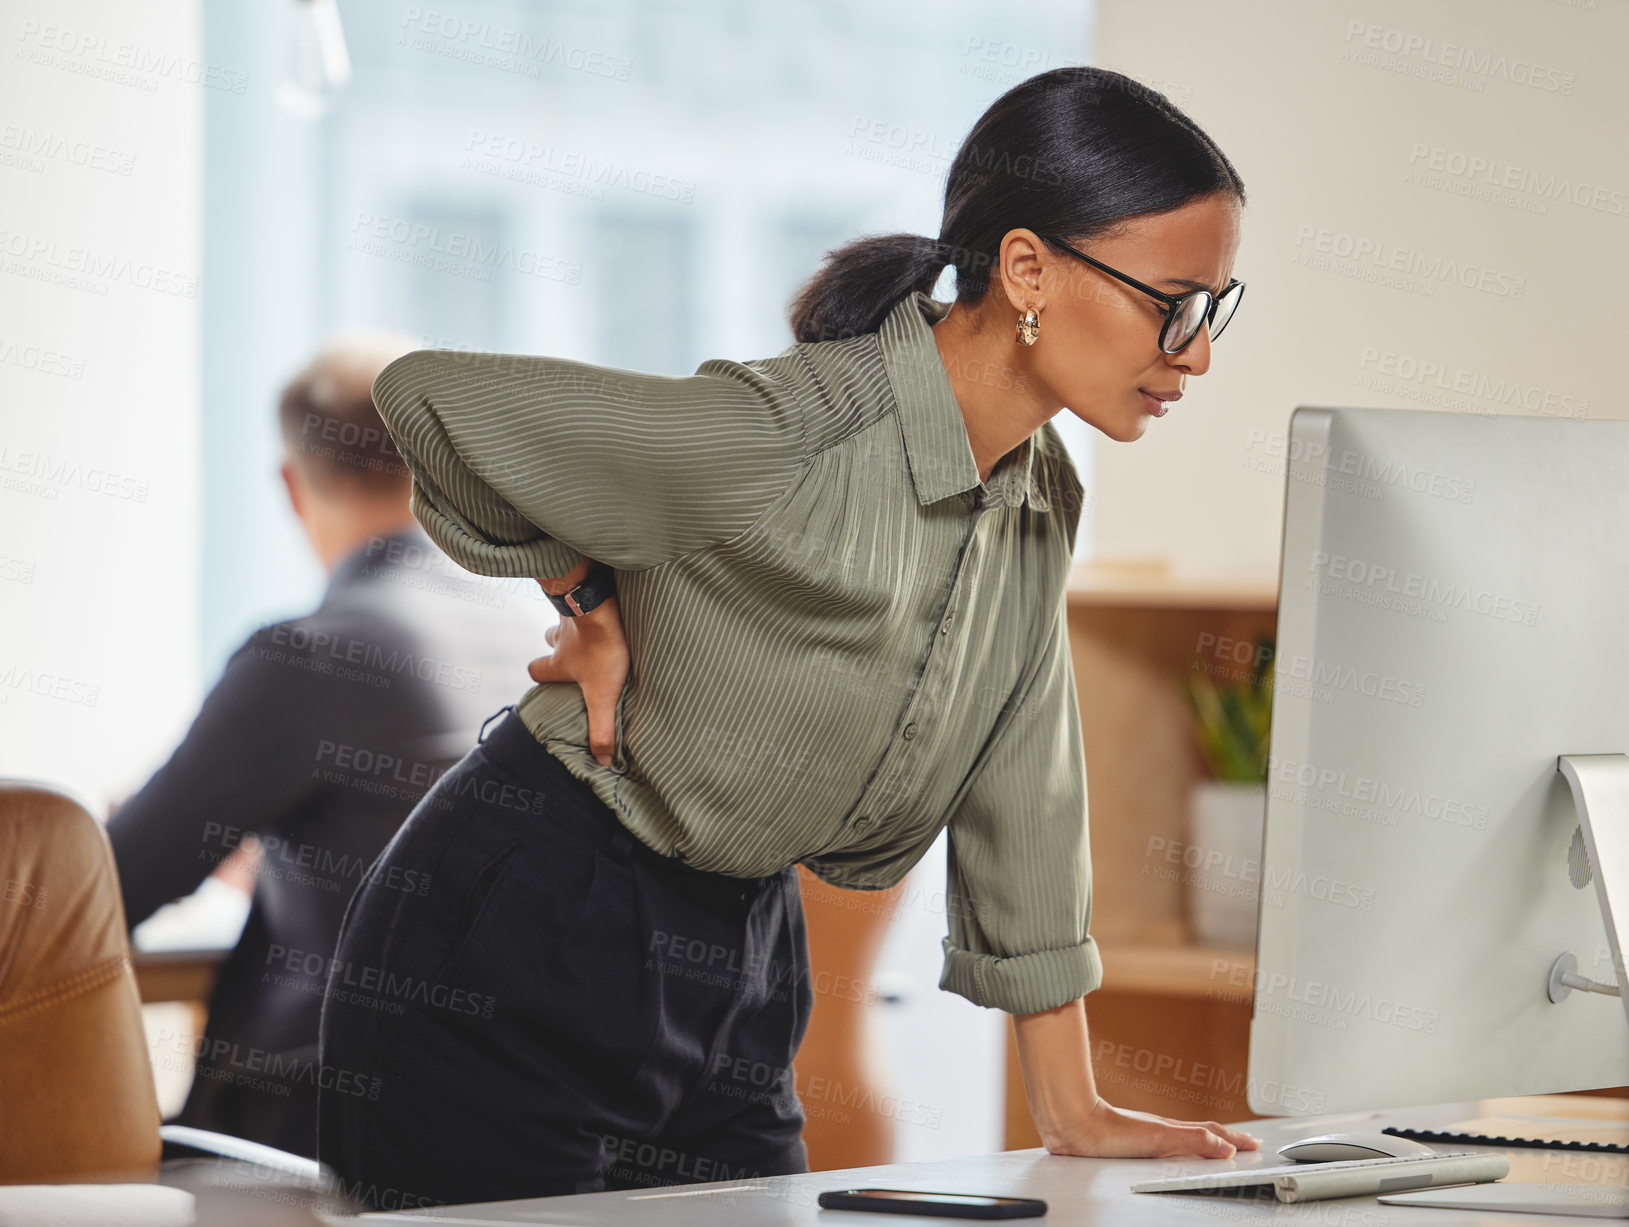 Buy stock photo Back pain, woman in office at desk with computer and burnout, deadline pressure and glasses at work. Tired, overworked and overwhelmed businesswoman at pc with injury, cramp or muscle ache at startup